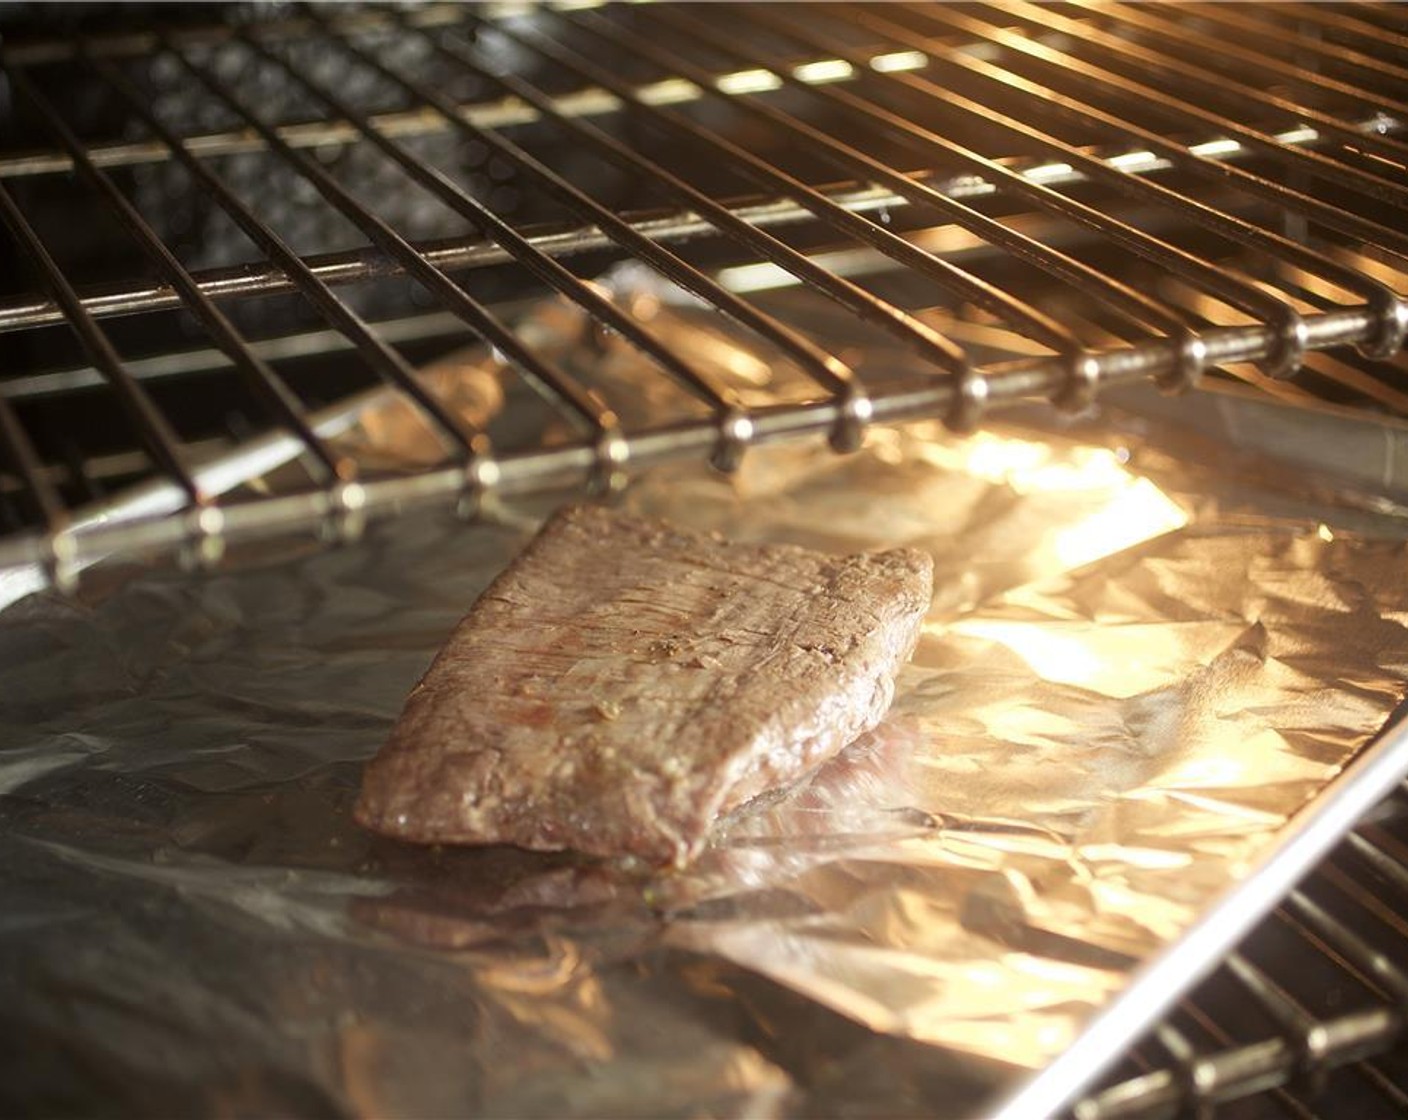 step 10 Pat Flank Steak (8 oz) dry with paper towels. Coat each side with Salt (1/4 tsp) and Ground Black Pepper (1/4 tsp) and Canola Oil (1 tsp). Place on a baking sheet lined with foil.